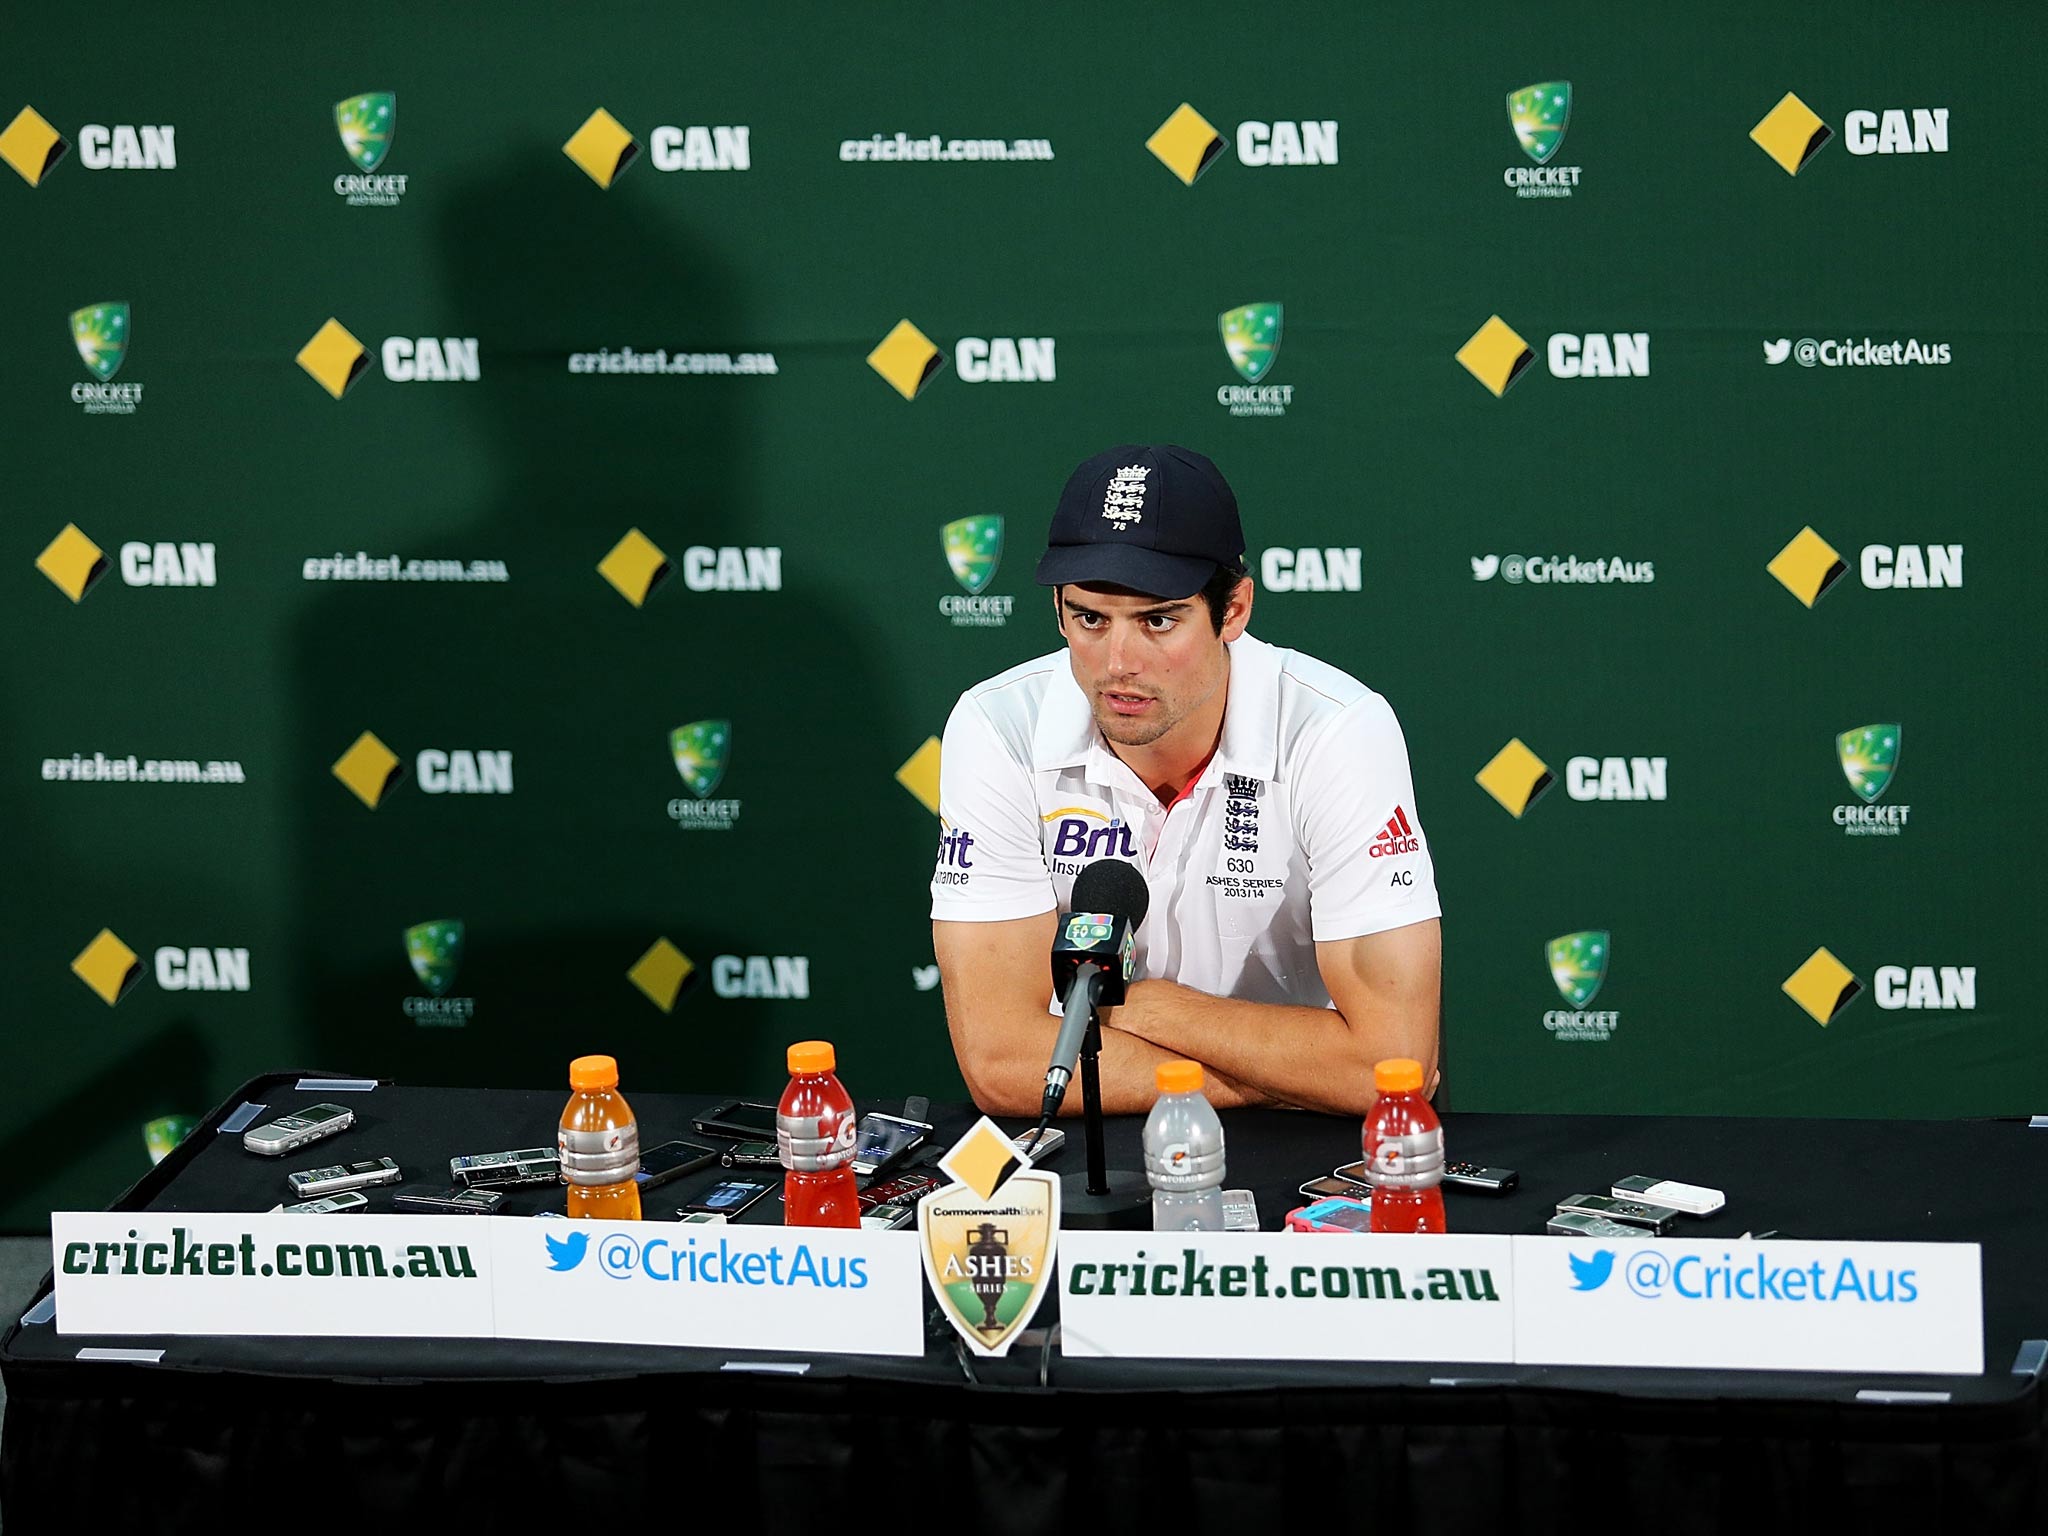 Alastair Cook talks to the press following England's second defeat in the Ashes series